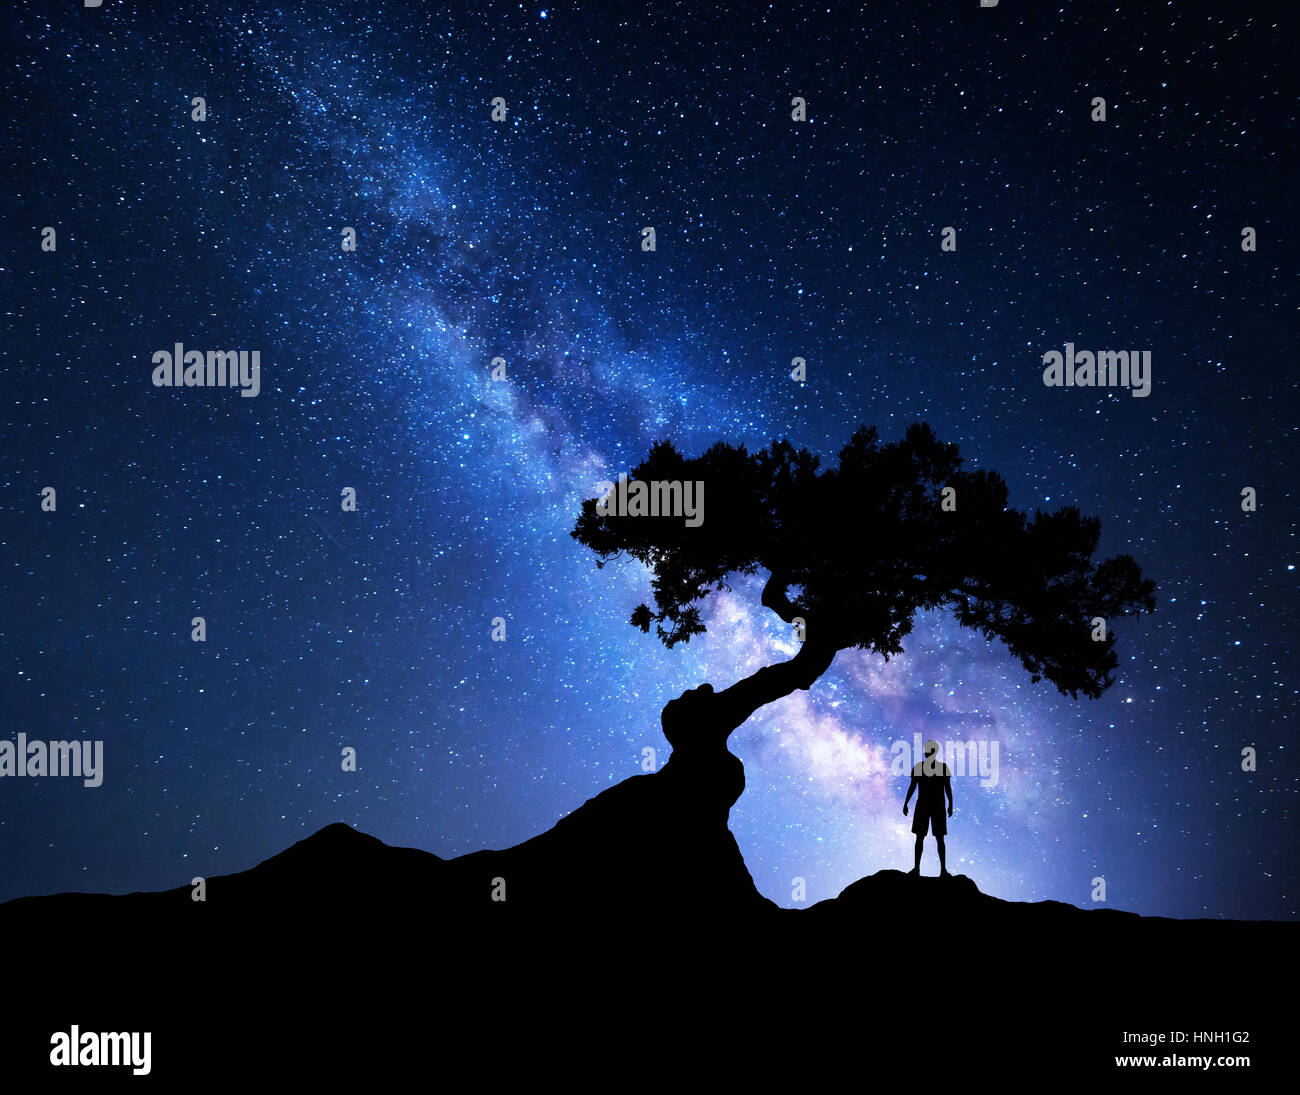 Milky Way. Night sky with stars, old tree and silhouette of a standing alone man on the mountain. Blue milky way with light and man. Travel background Stock Photo